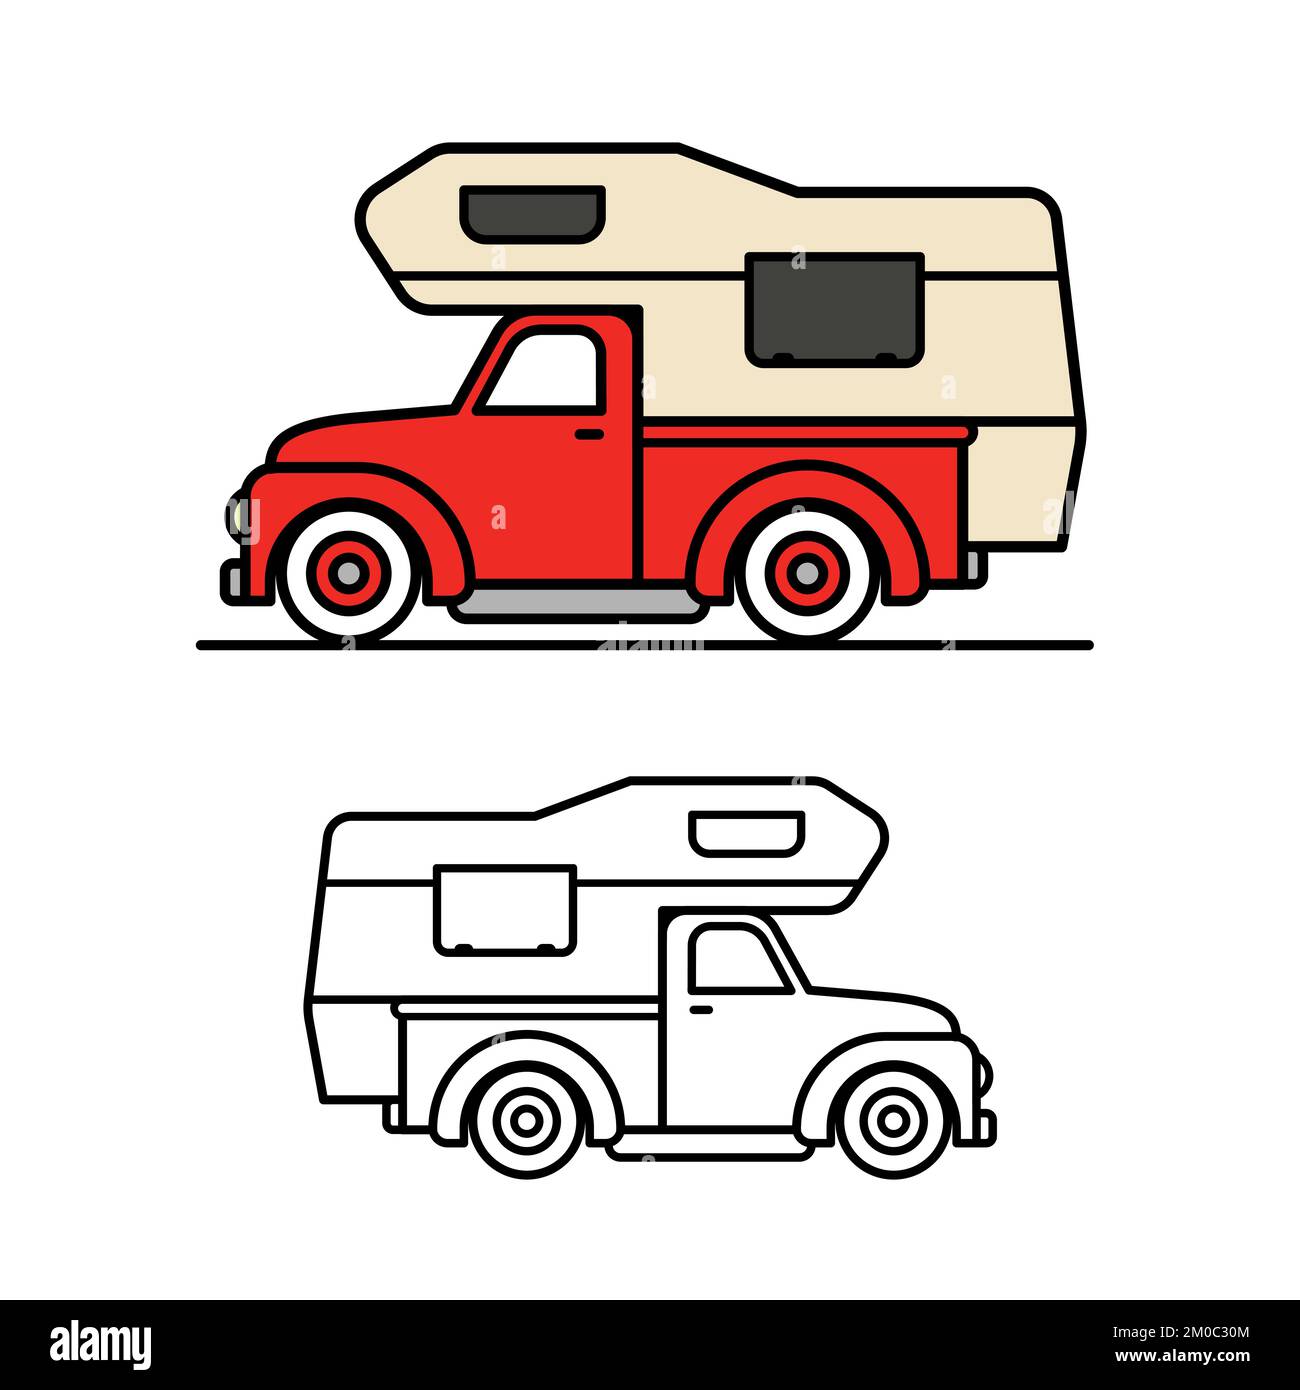 Classic retro camper shell on red vintage pickup truck. Vector illustration icon set with bold black outlines. Stock Vector